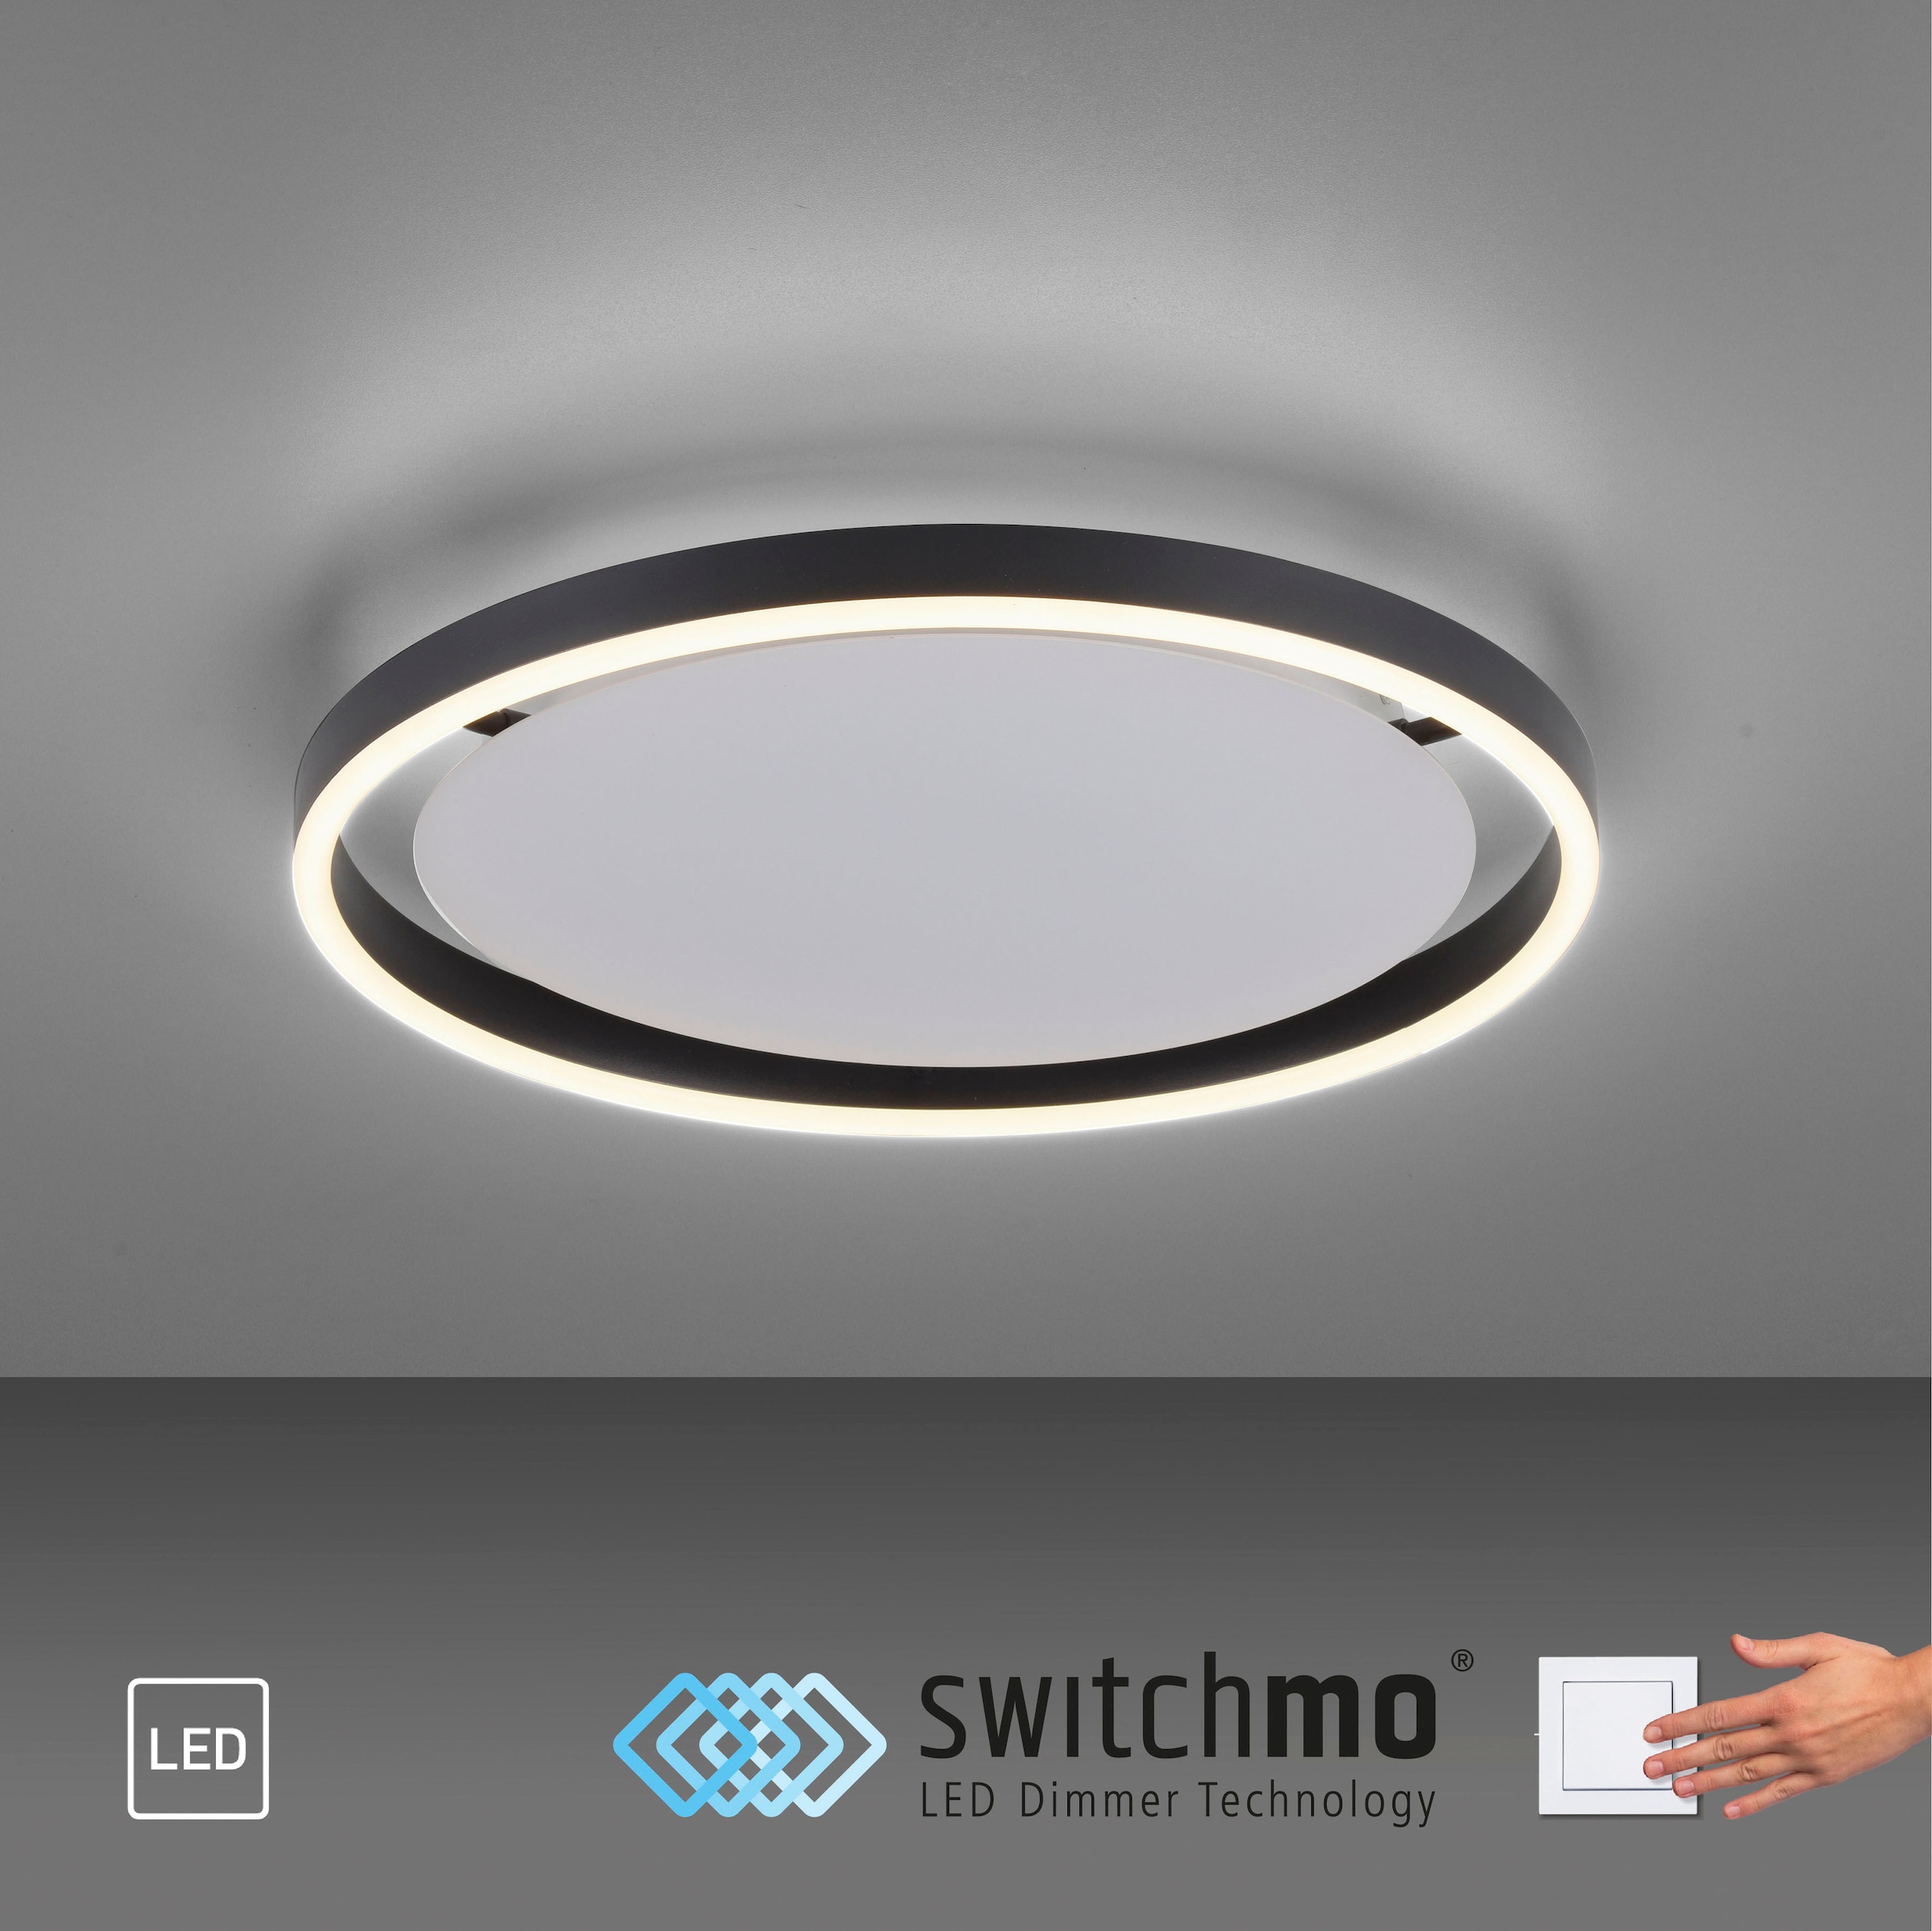 im LED, JUST dimmbar, Online Switchmo, LIGHT 1 Deckenleuchte Shop dimmbar, »RITUS«, flammig-flammig, Switchmo OTTO